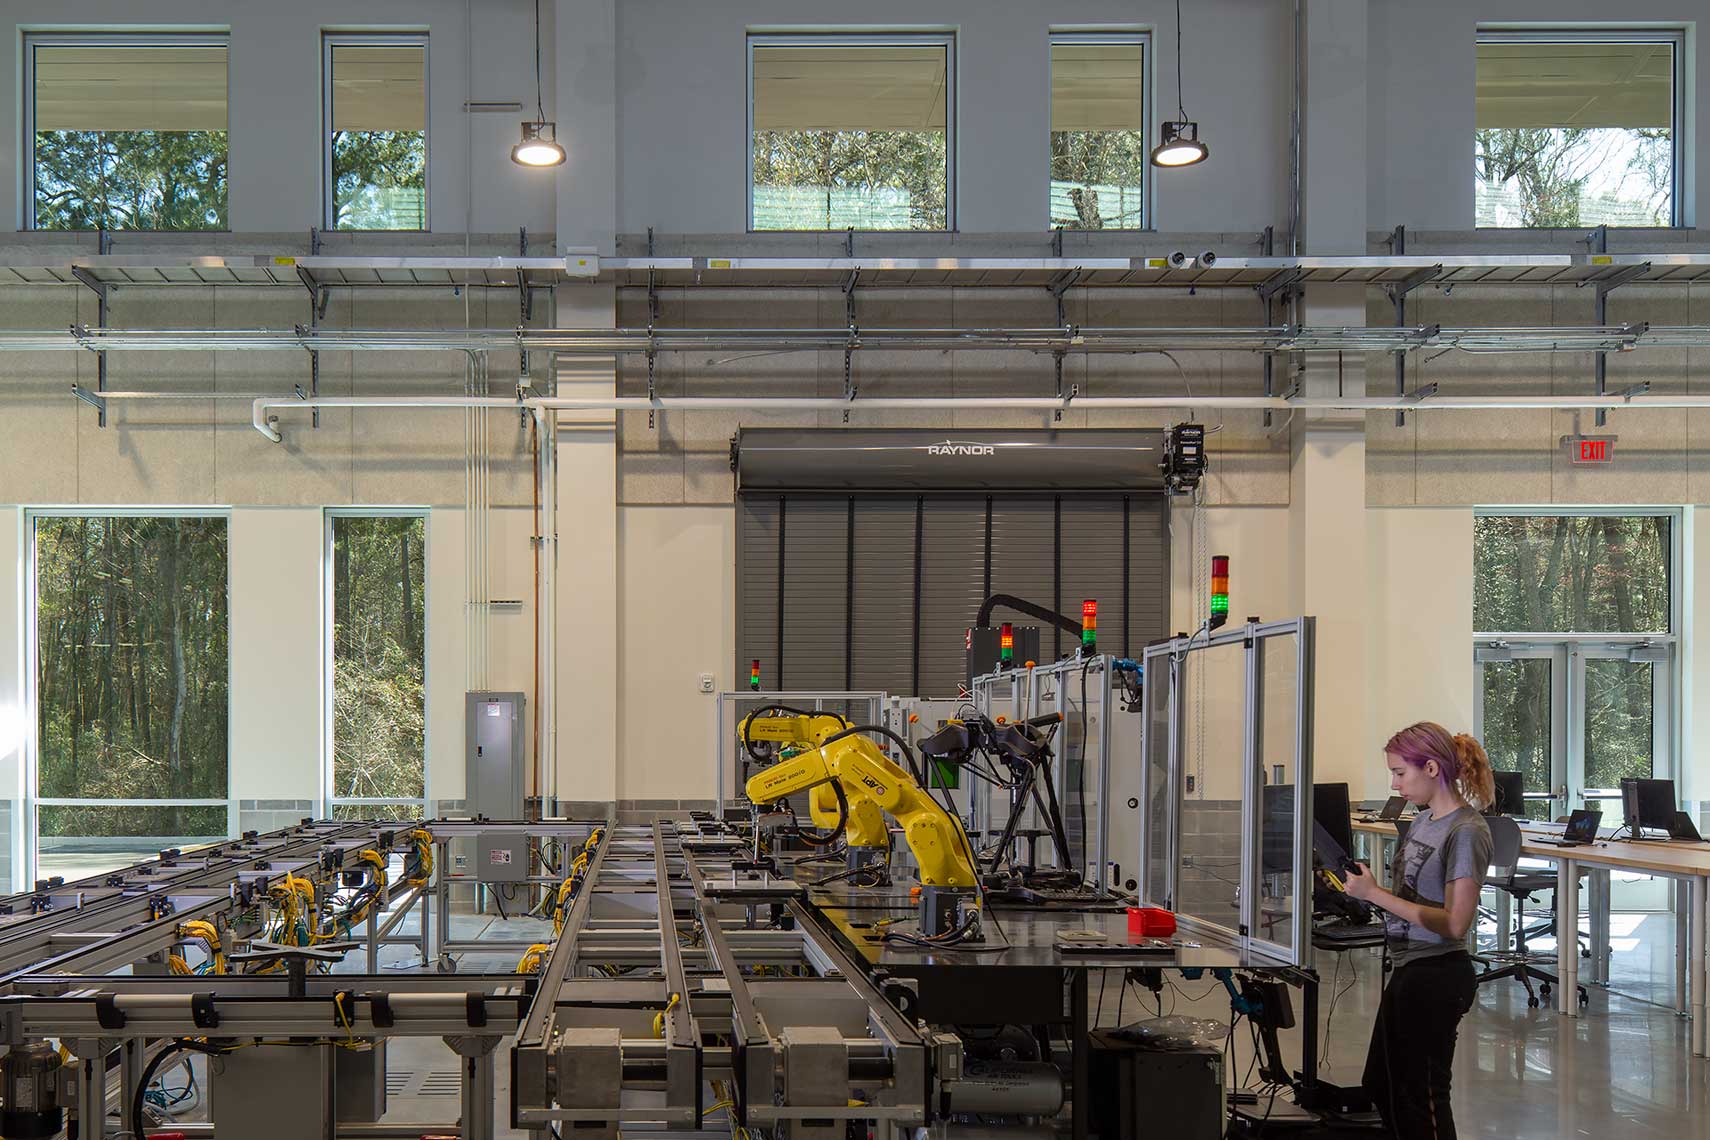 A student oversees the Robotics manufacturing facility at GA Southern